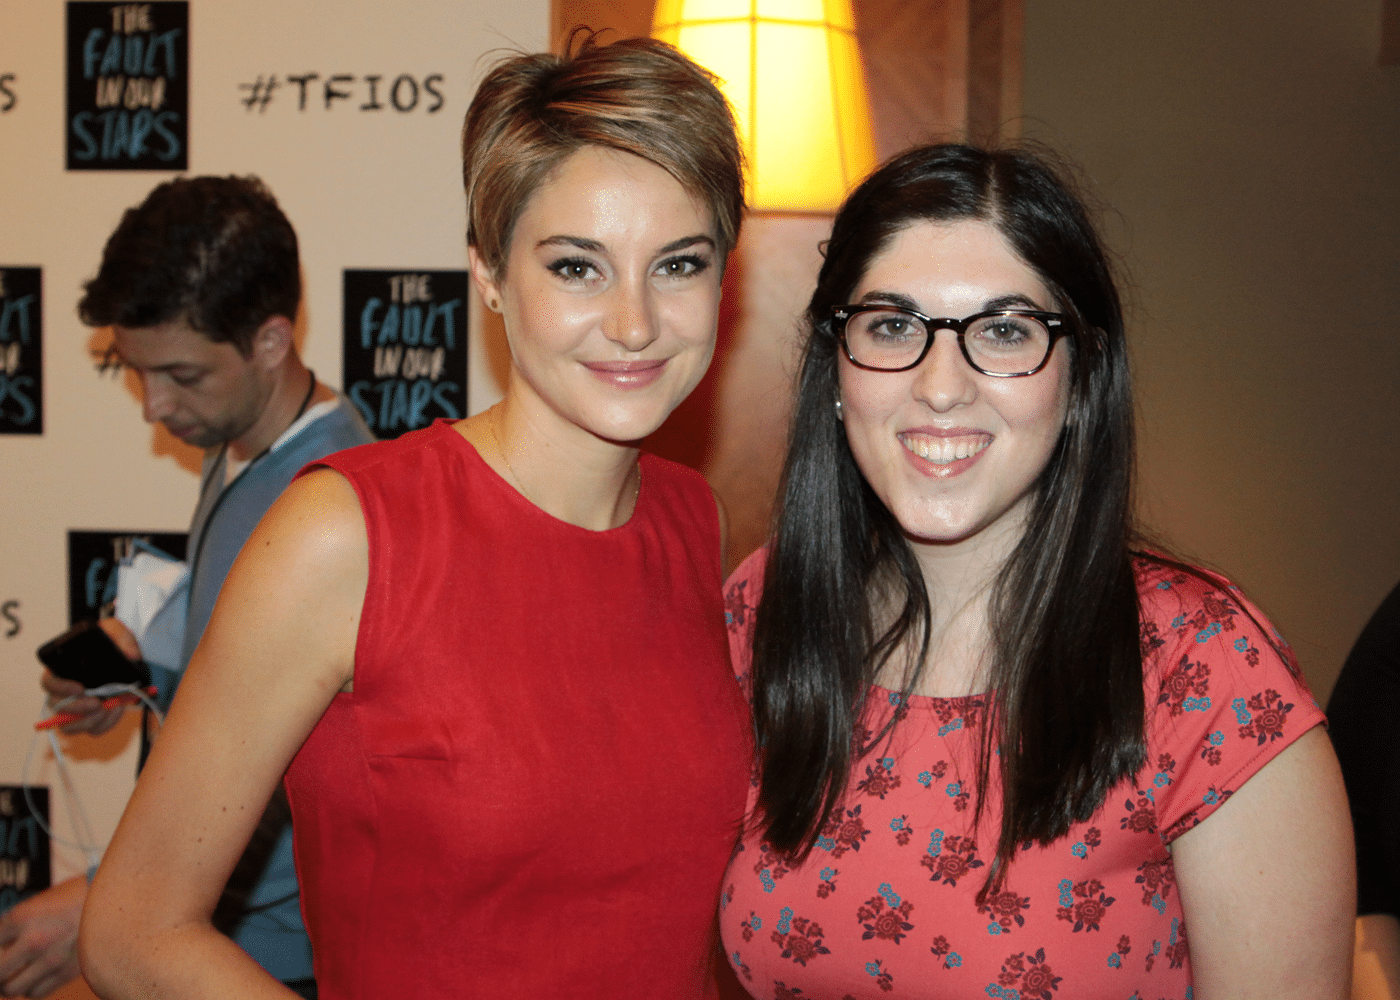 our intern posing with Shailene Woodley at The Fault in our Stars opening